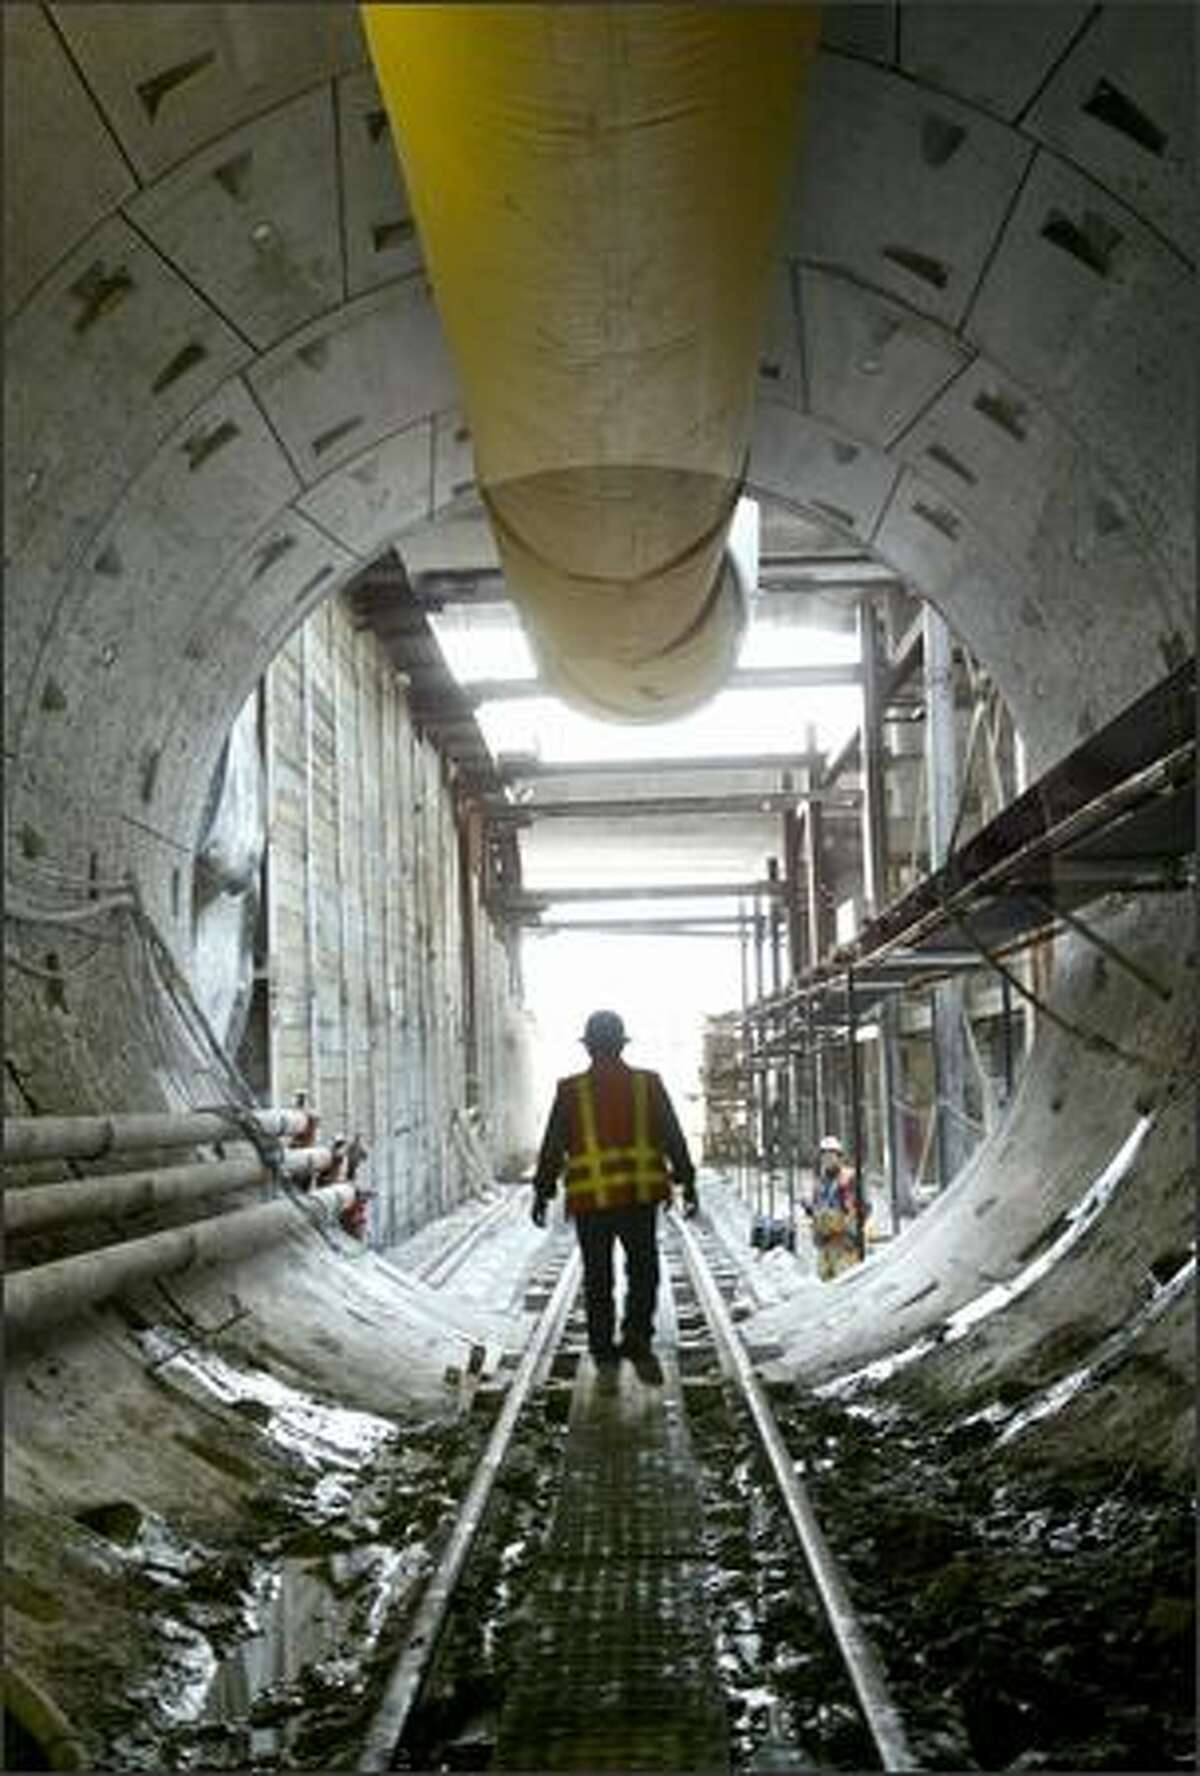 A worker leaves Sound Transit's Beacon Hill light rail tunnel during a media tour Wednesday. A 642-ton tunnel-boring machine, nicknamed the Emerald Mole, is digging the tunnel.